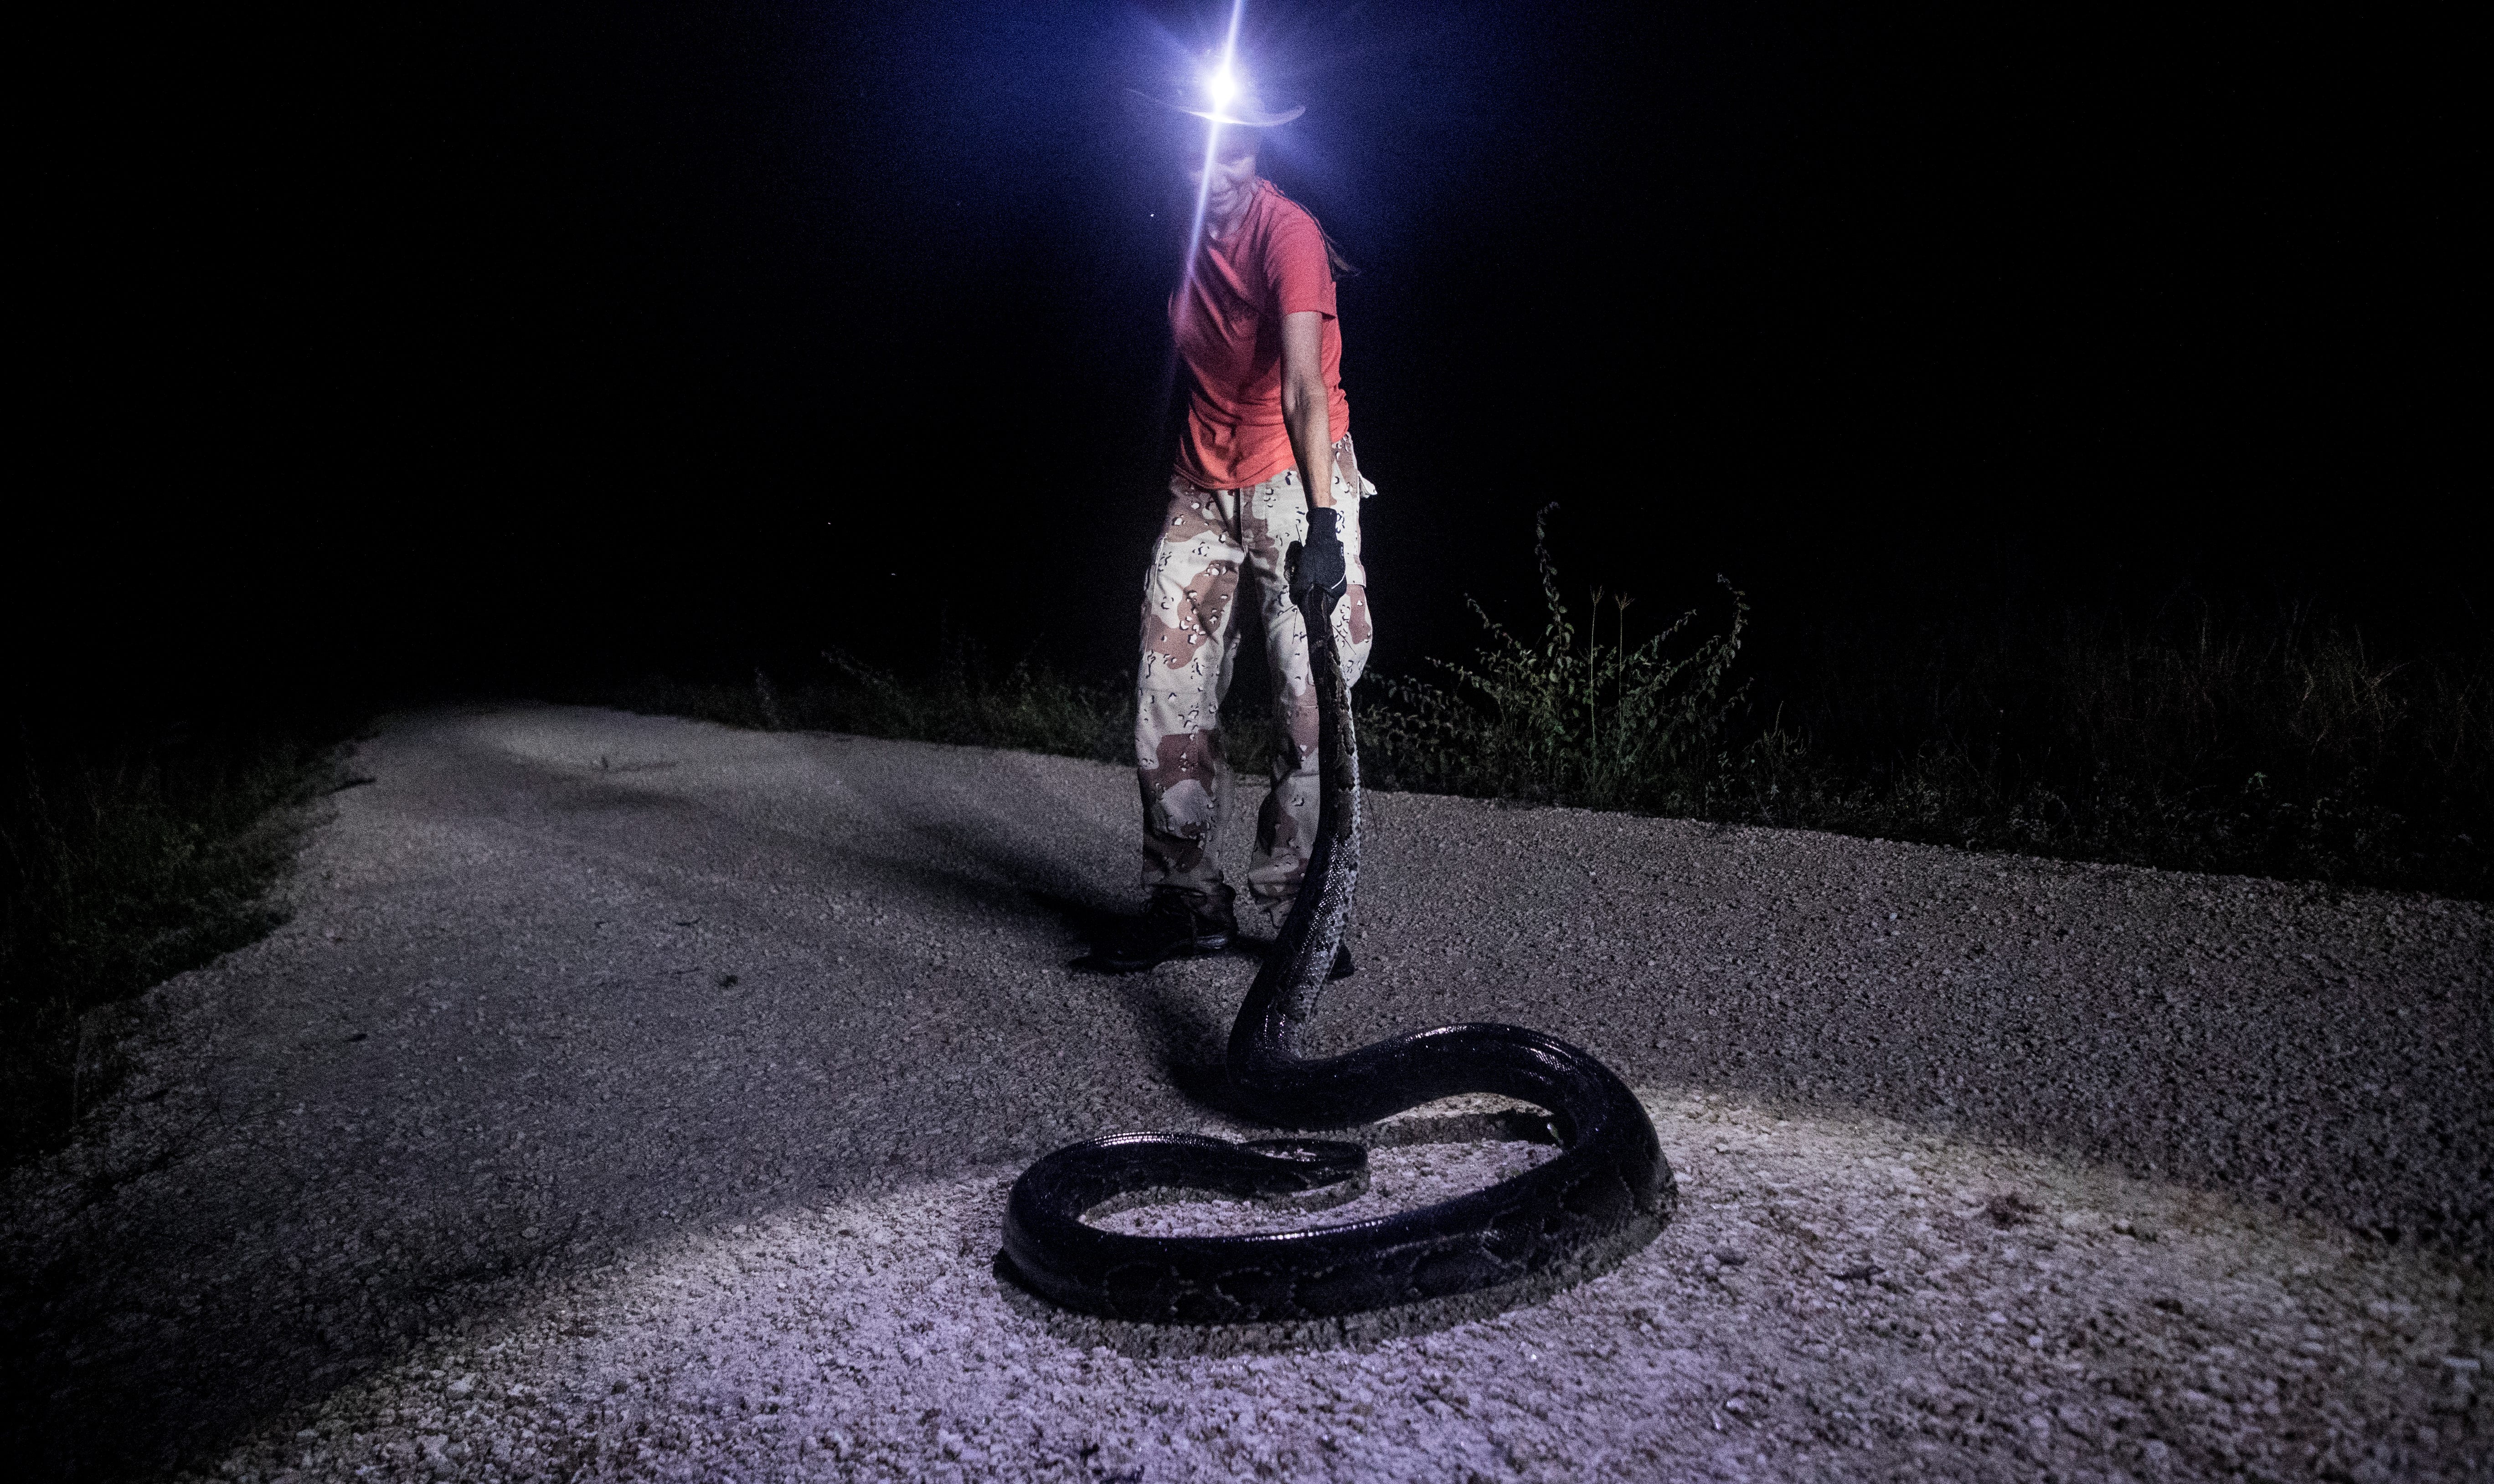 Donna Kalil captures a wild Burmese python in the Everglades west of Miami on Monday October, 28, 2019. She hunts several days a week and has notched hundreds of the invasive species. The pythons have invaded the Everglades and have caused havoc to the ecosystem.